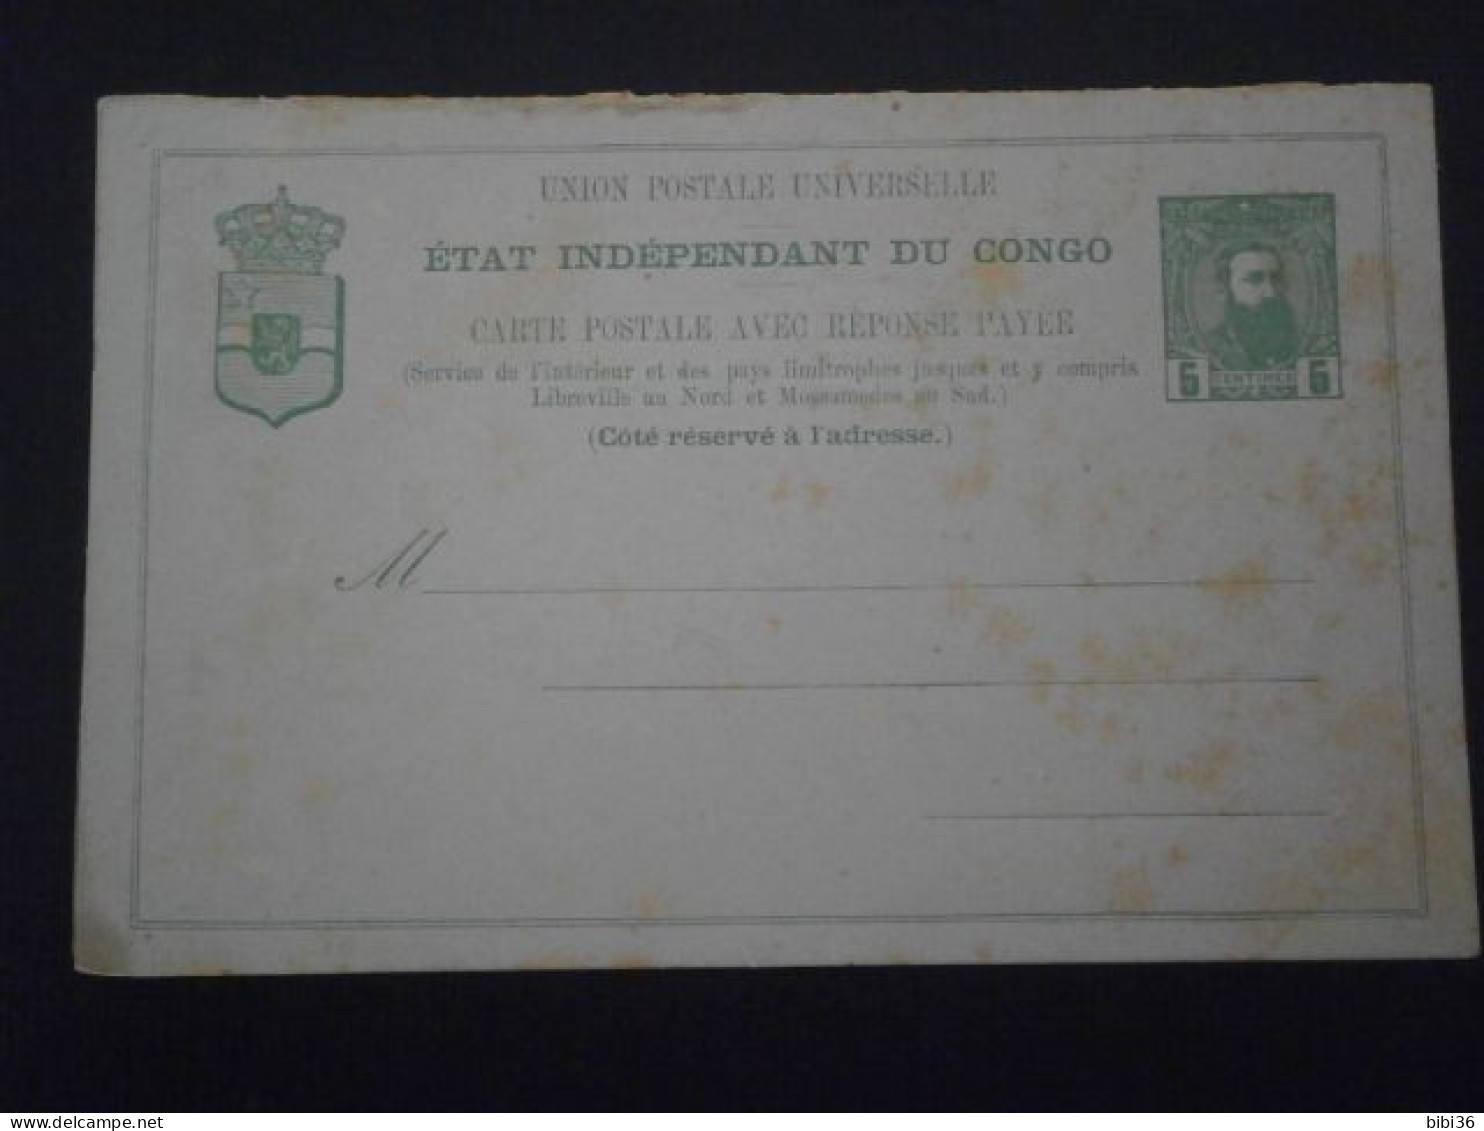 CONGO BELGE BELGIAN LETTRE ENVELOPPE COURRIER ENTIER POSTAL LEOPOLD II REPONSE PAYEE NEUF CARTE POSTALE STATIONERY PPC - Stamped Stationery